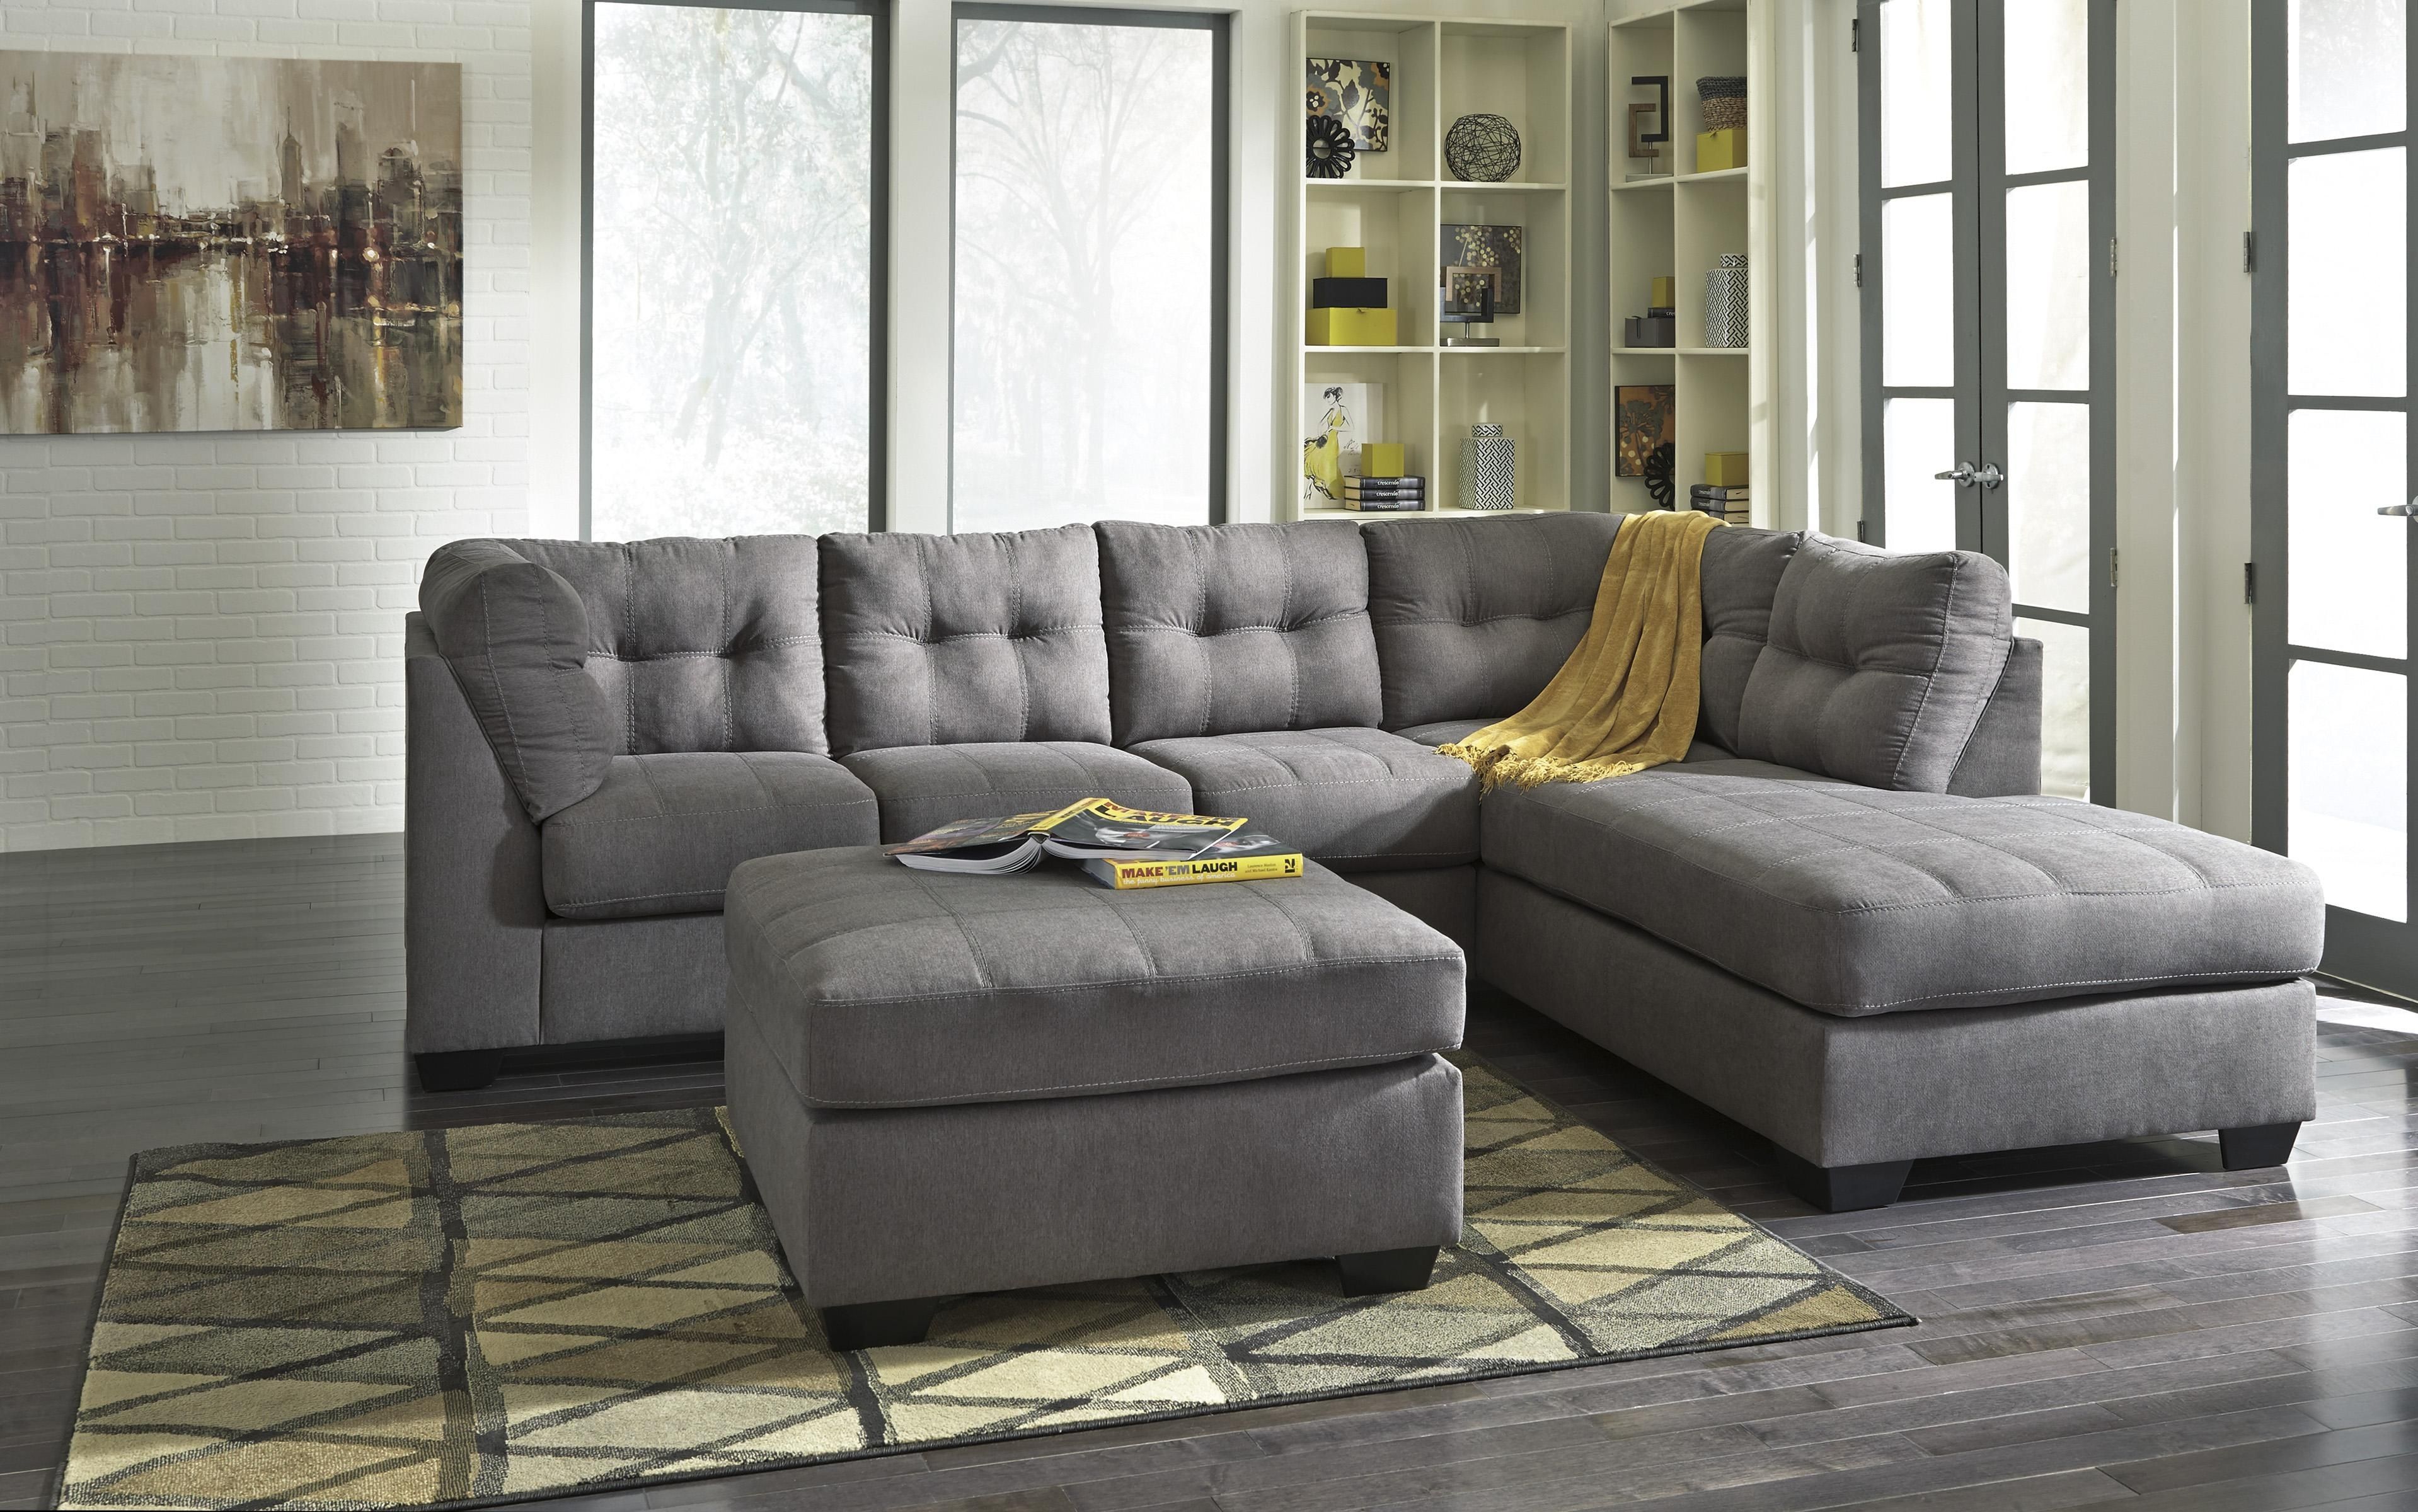 2 Piece Sectional With Right Chaisebenchcraft | Wolf And Inside Sectionals With Chaise And Ottoman (View 15 of 15)